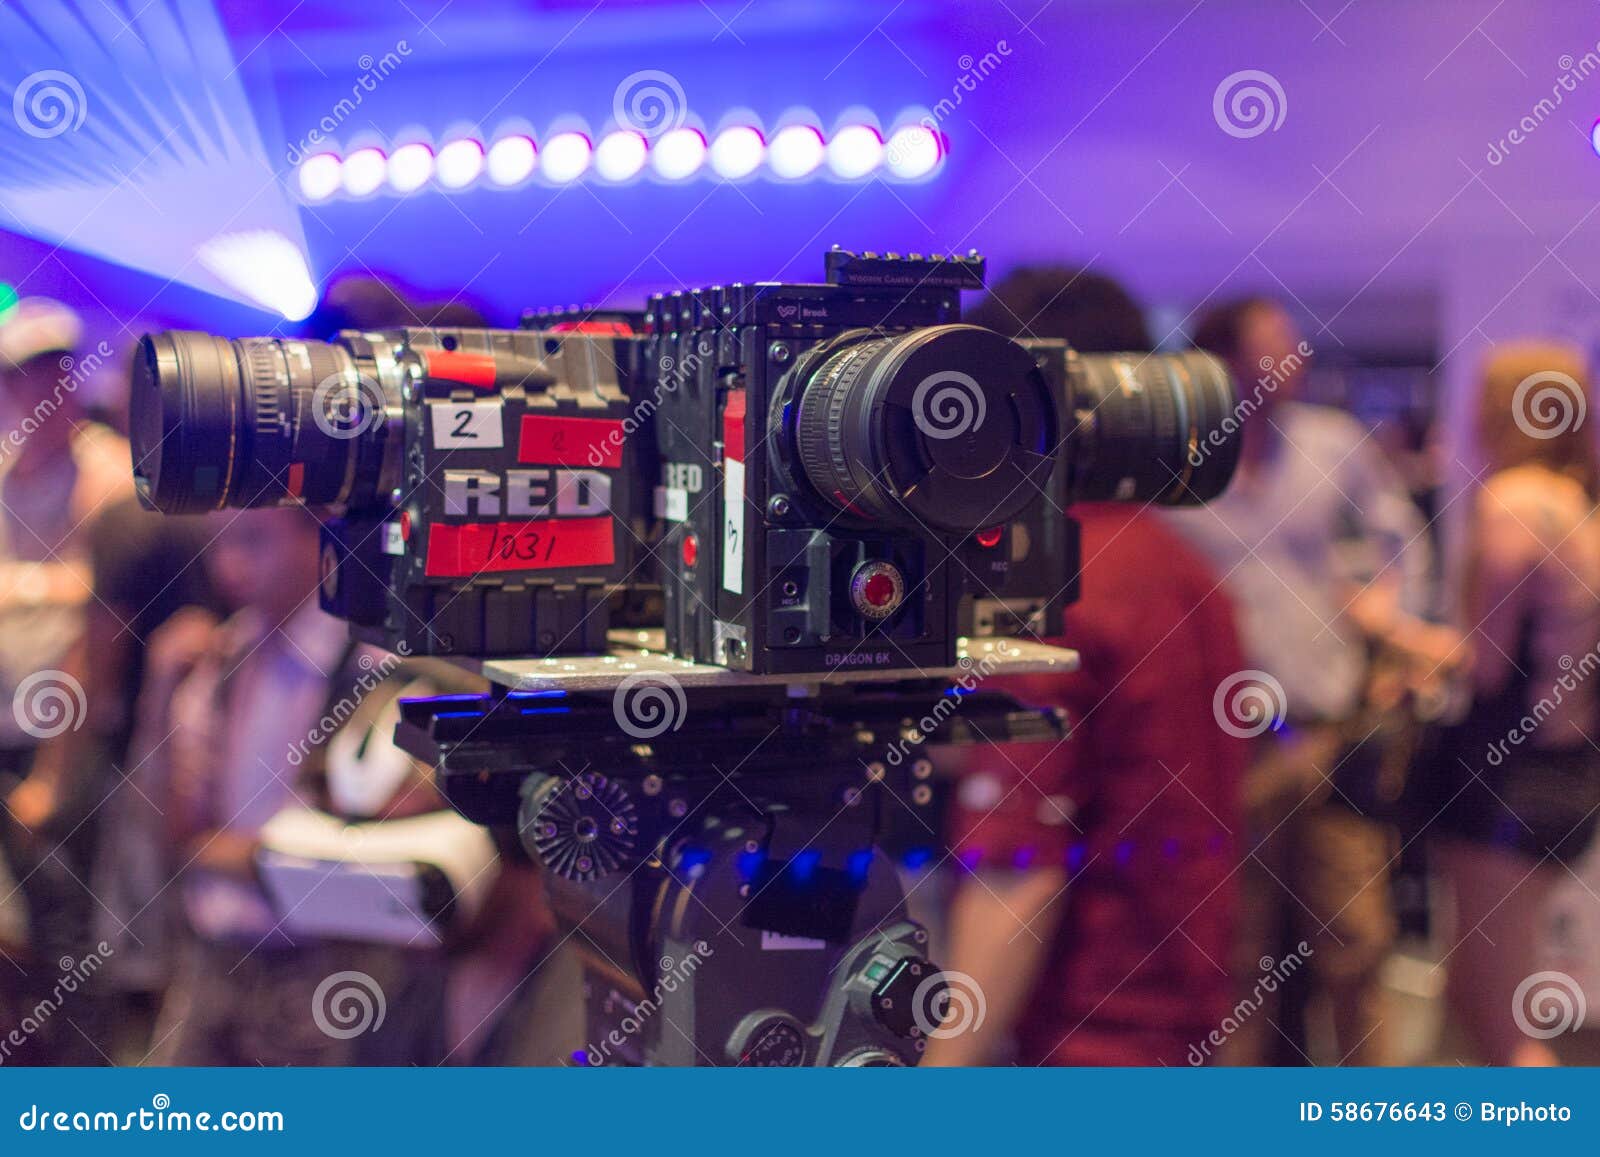 360 Degree Virtual Reality Camera System Editorial Stock Photo Image Of Console Industry 58676643